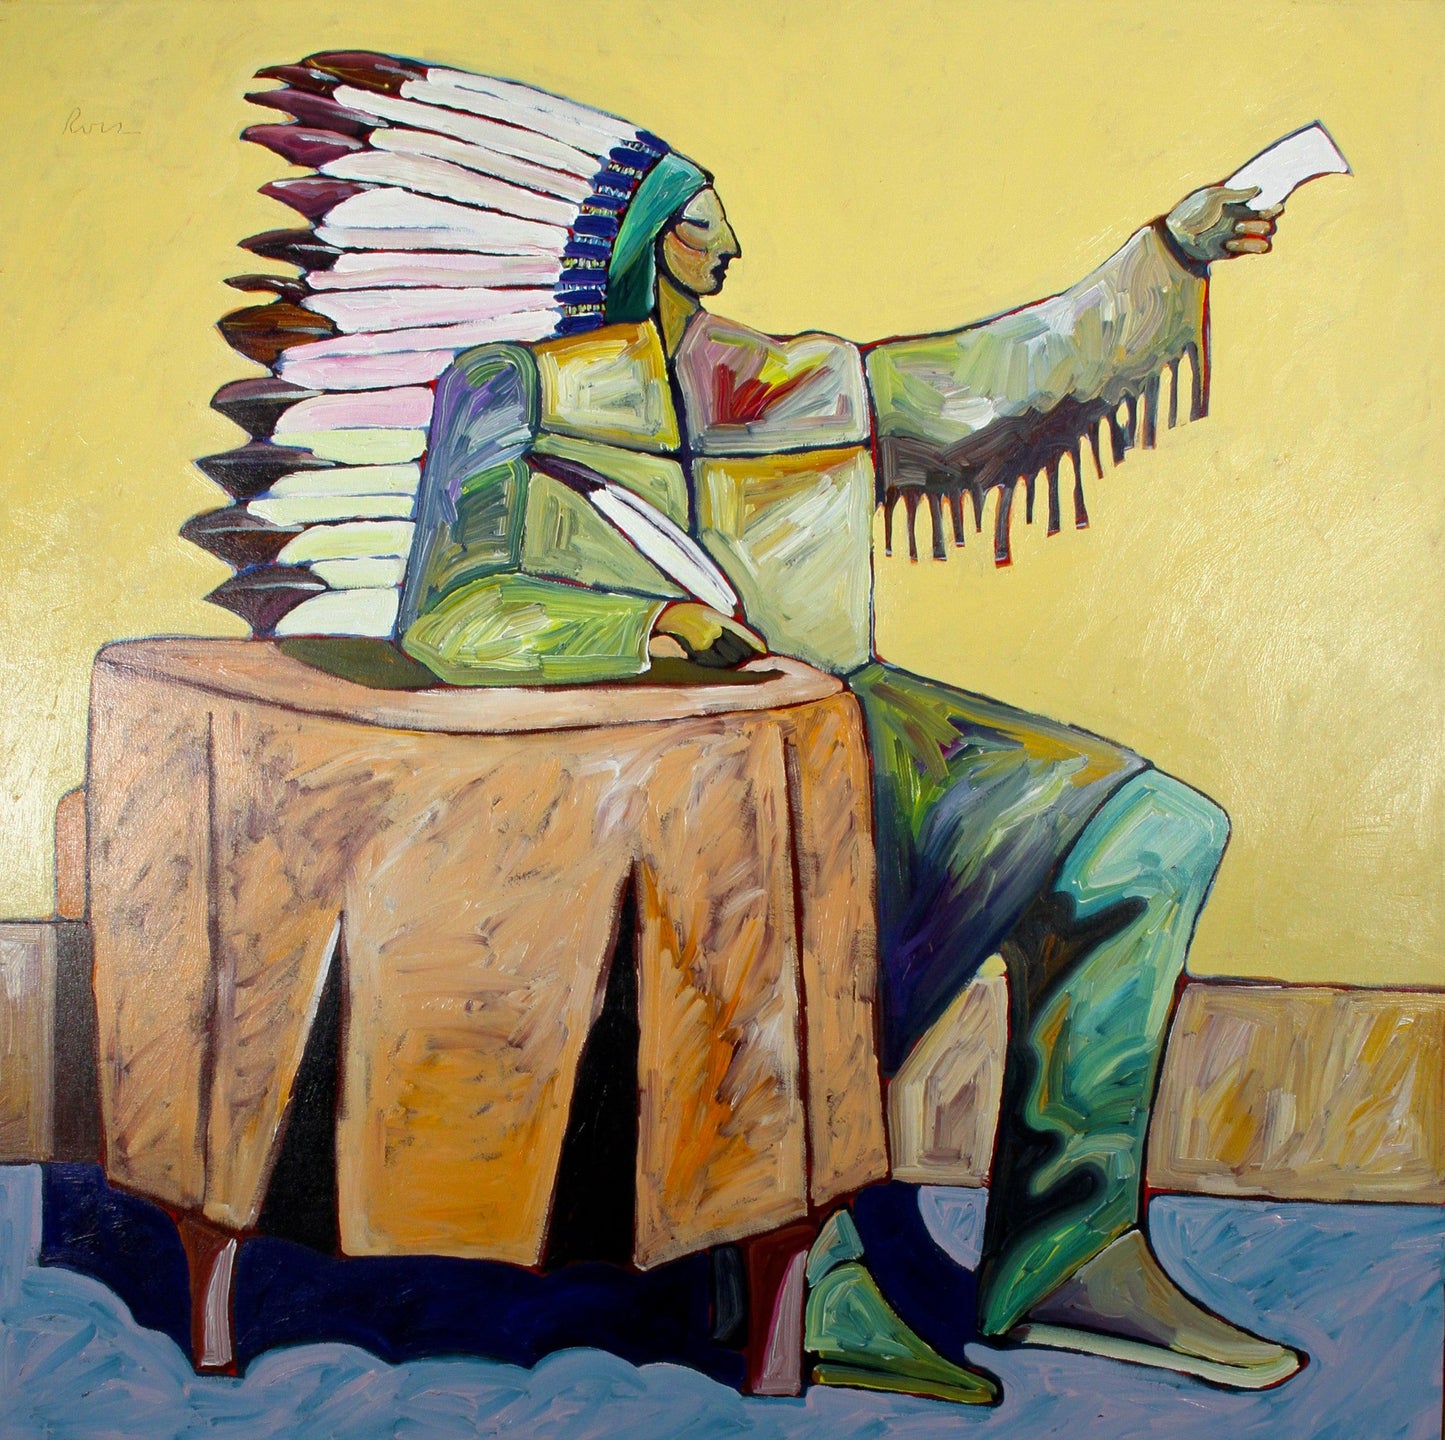 Sitting Bull Signing Autographs-Painting-Thom Ross-Sorrel Sky Gallery